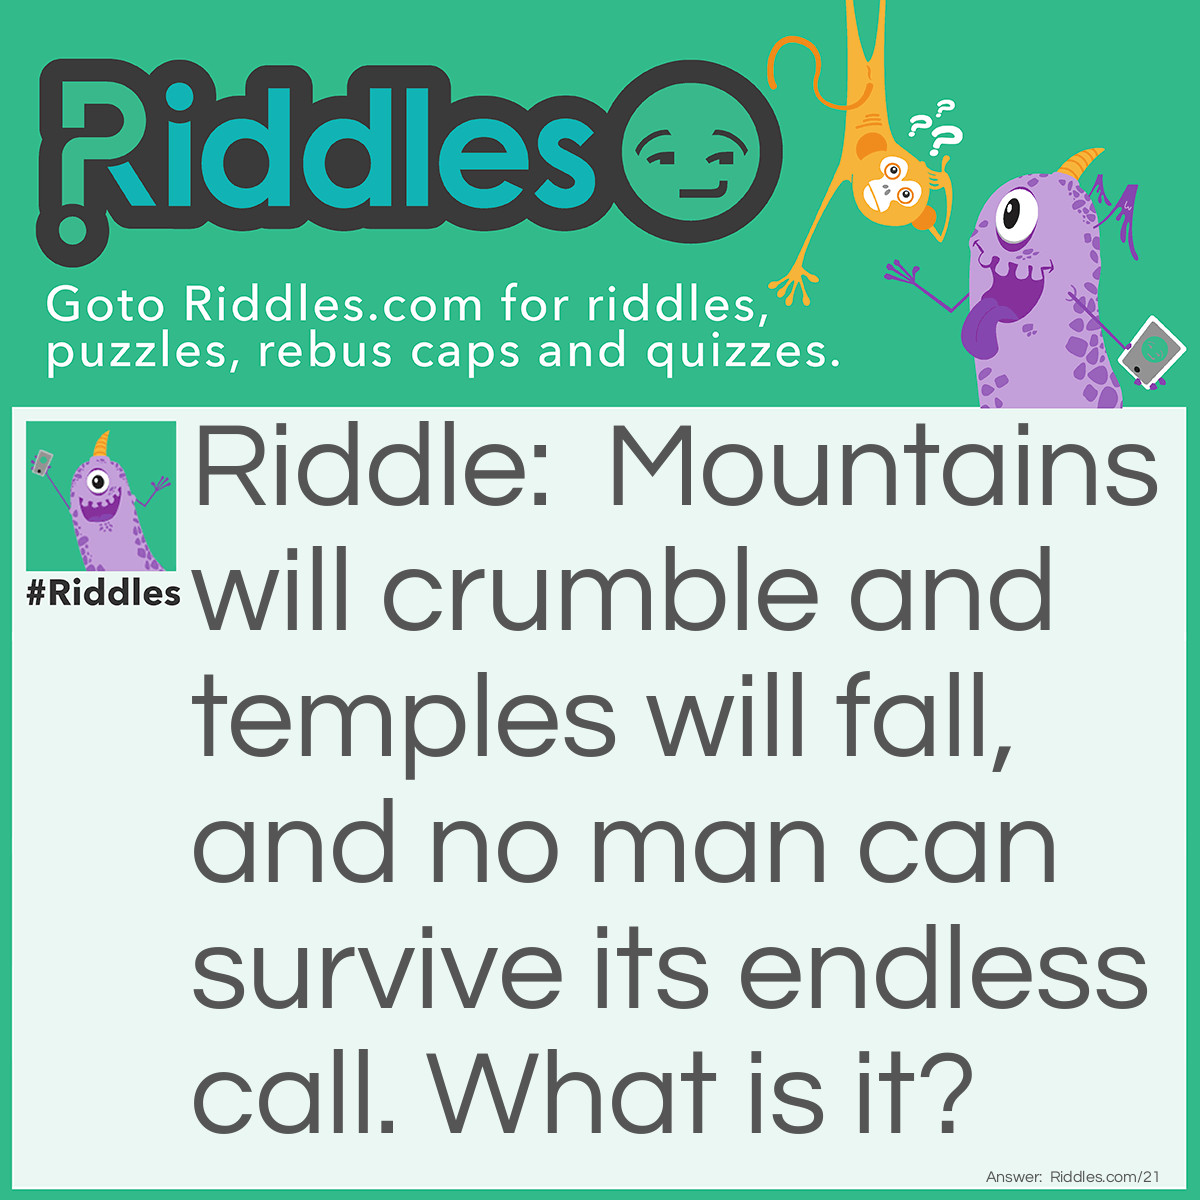 Riddle: Mountains will crumble and temples will fall, and no man can survive its endless call. What is it? Answer: It is time.